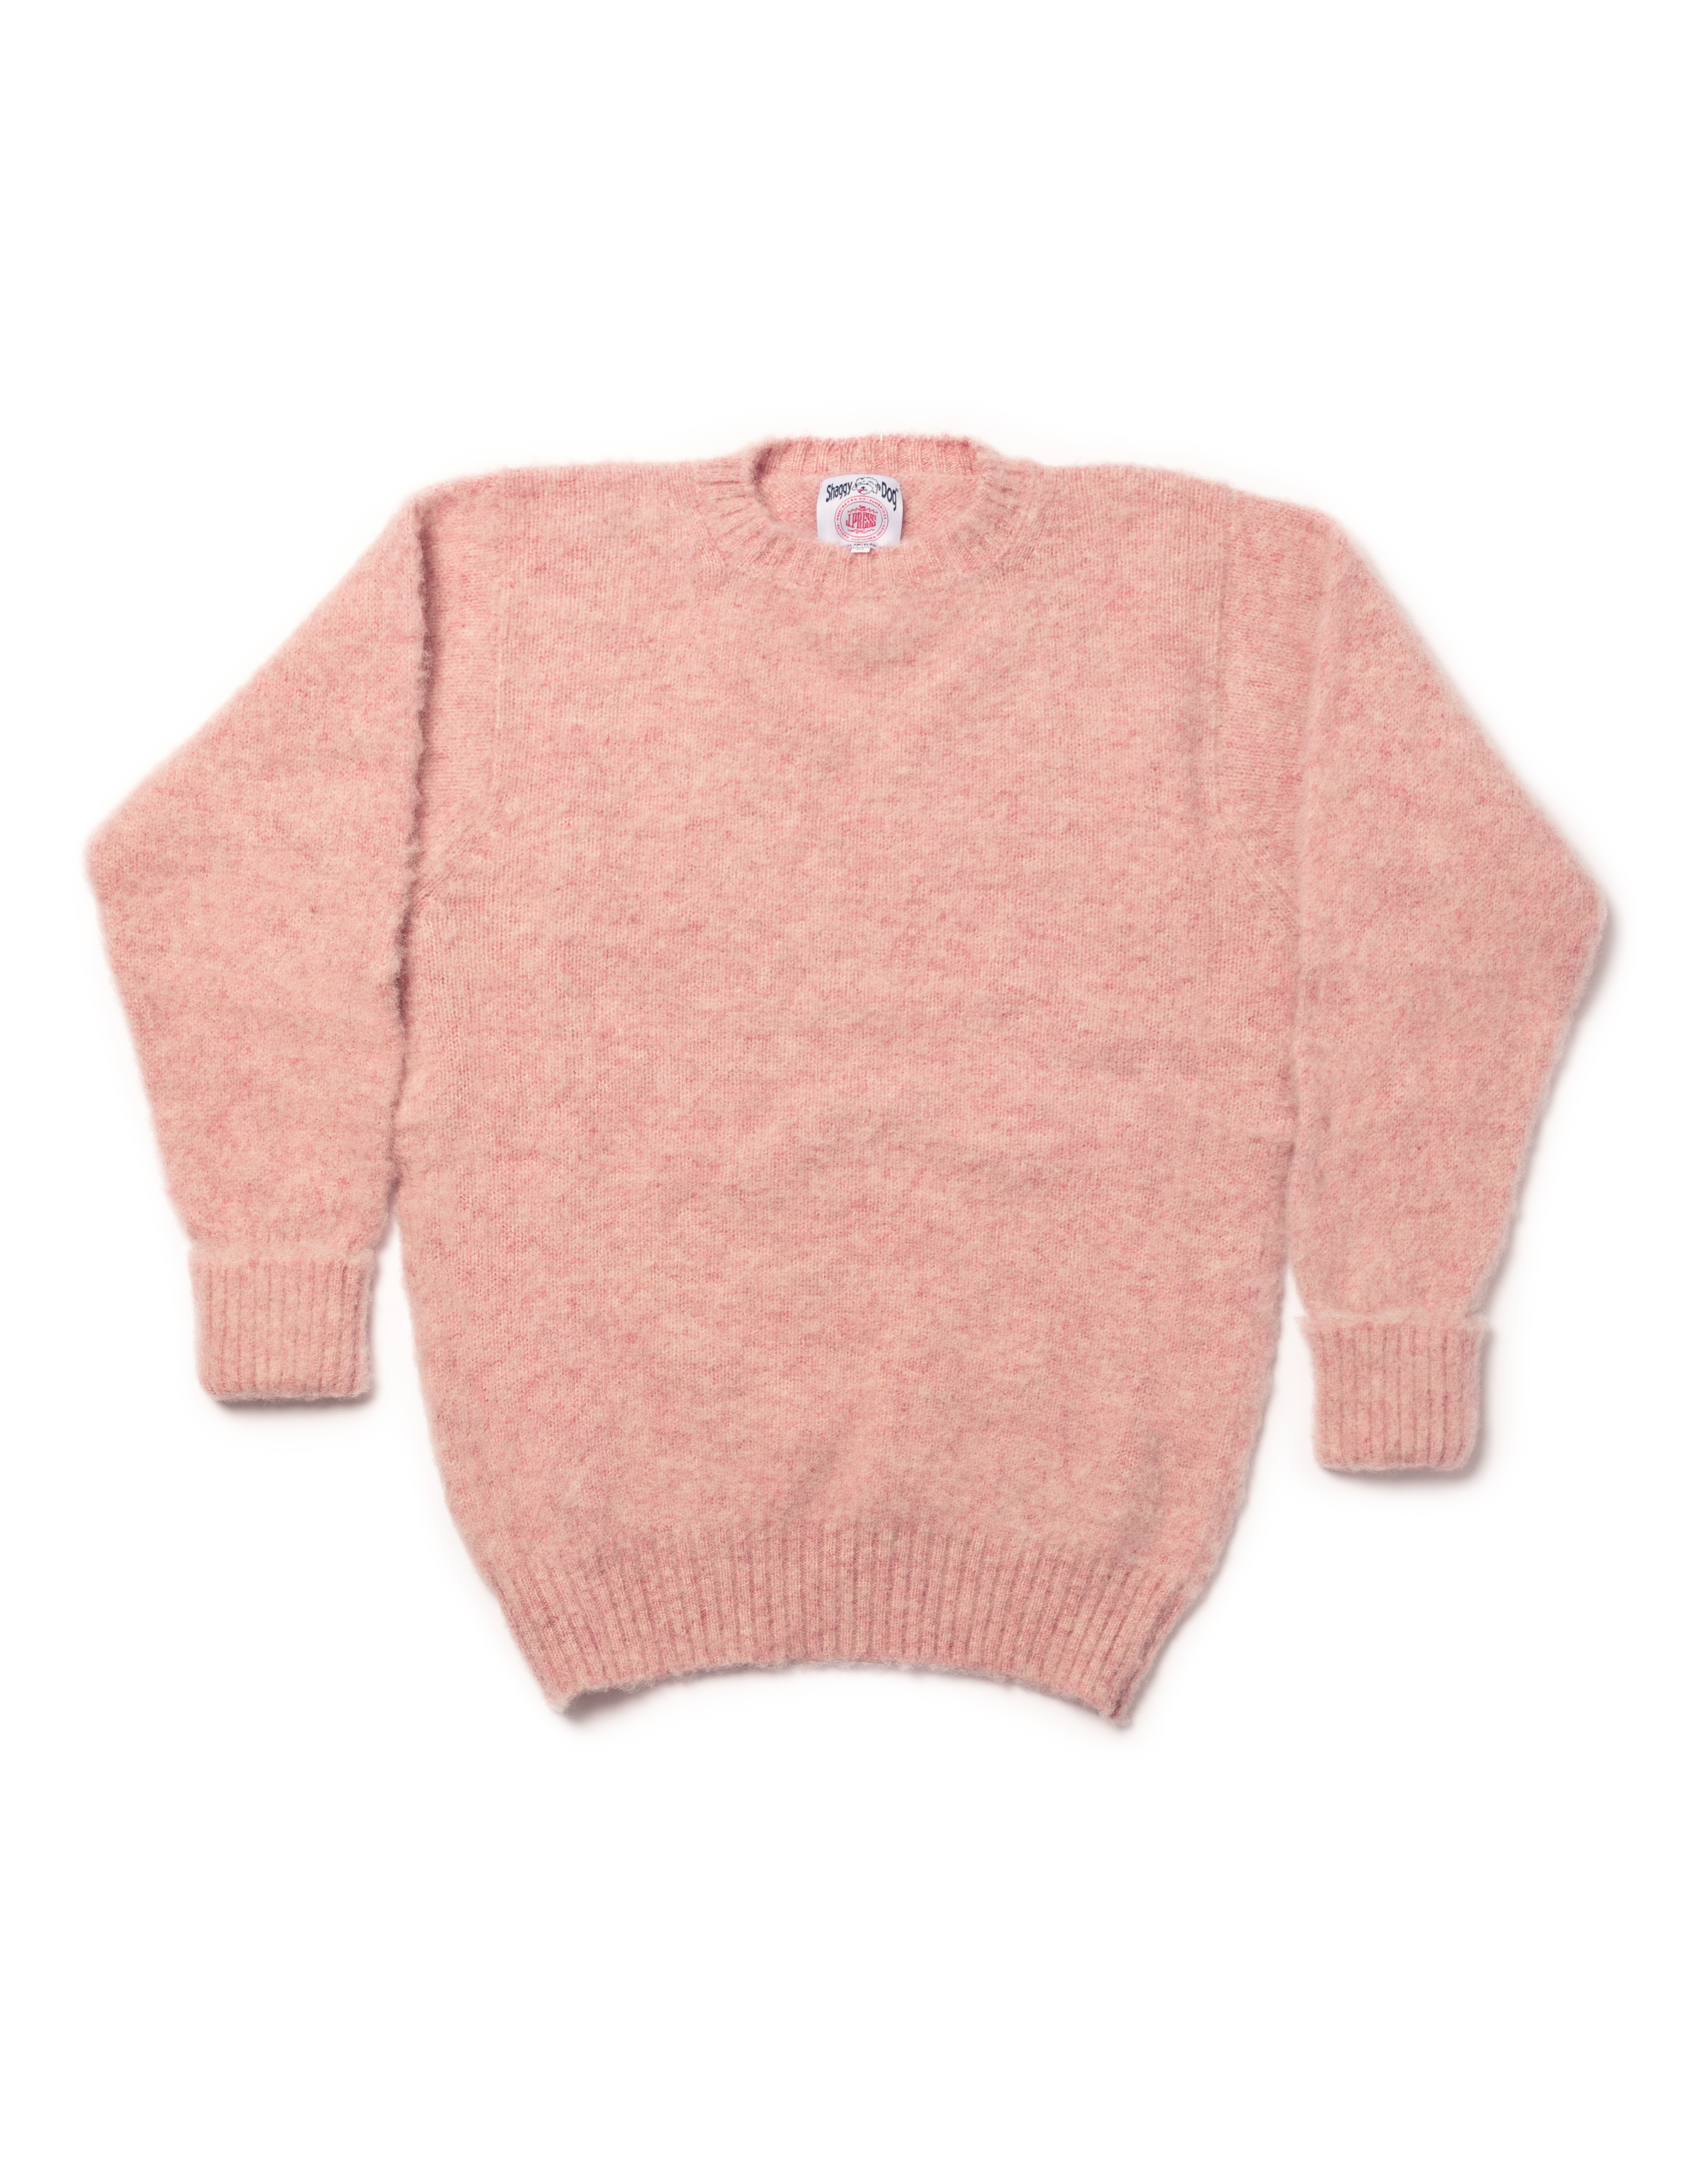 Shaggy Dog Sweater Pink Heather - Classic Fit | Men's Sweaters – J 